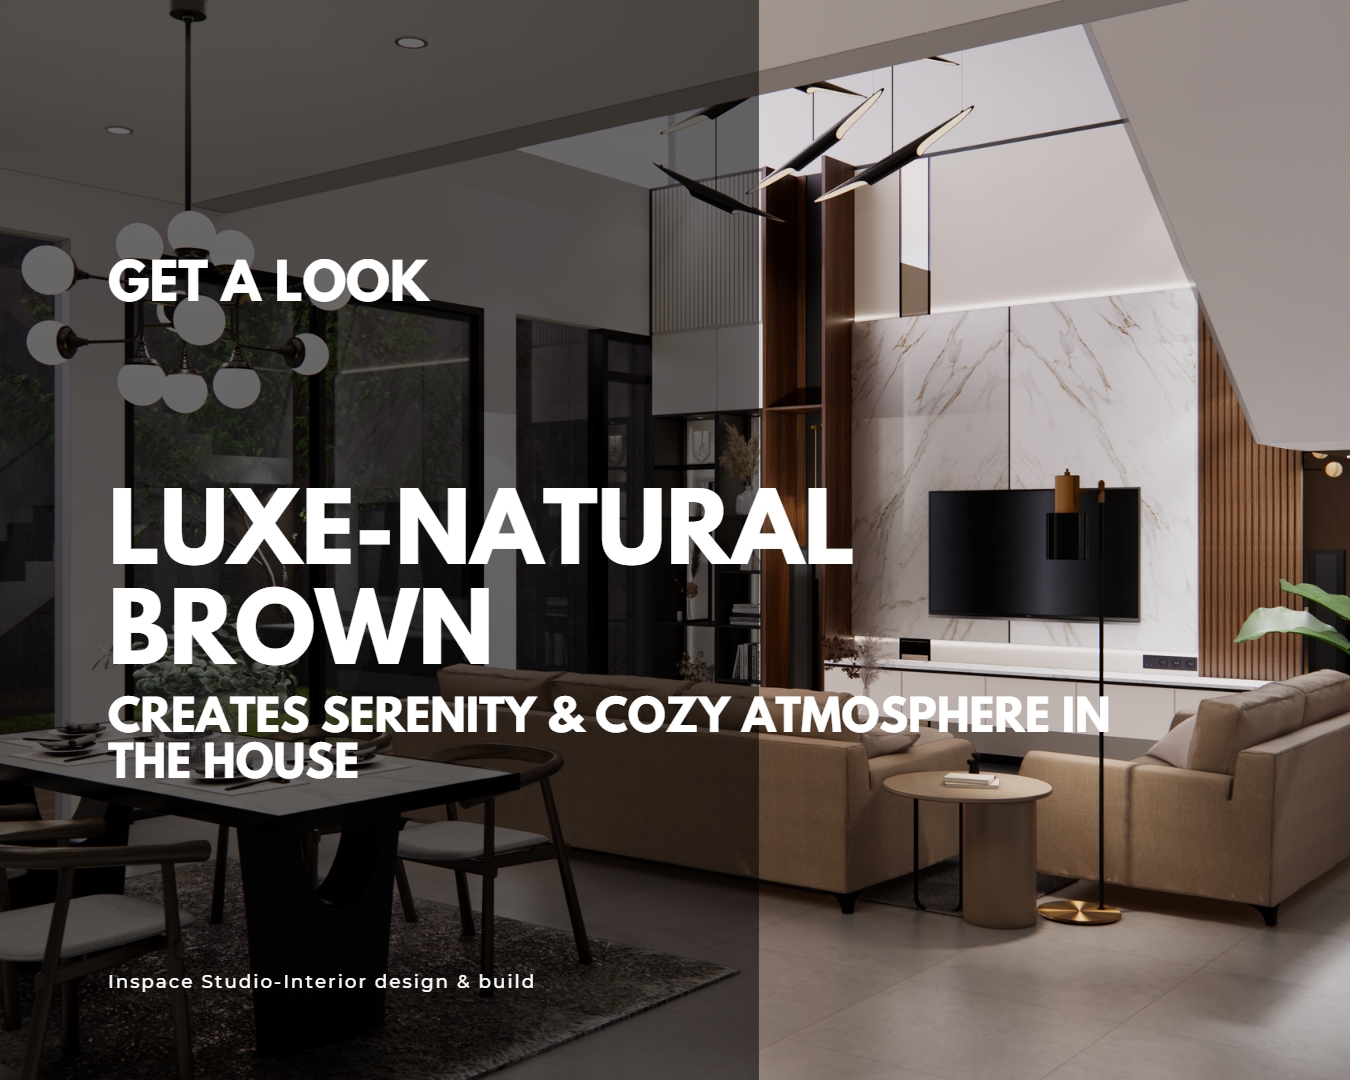 Luxe-Natural Brown Living Room Creates Serenity and Cozy Atmosphere in the House